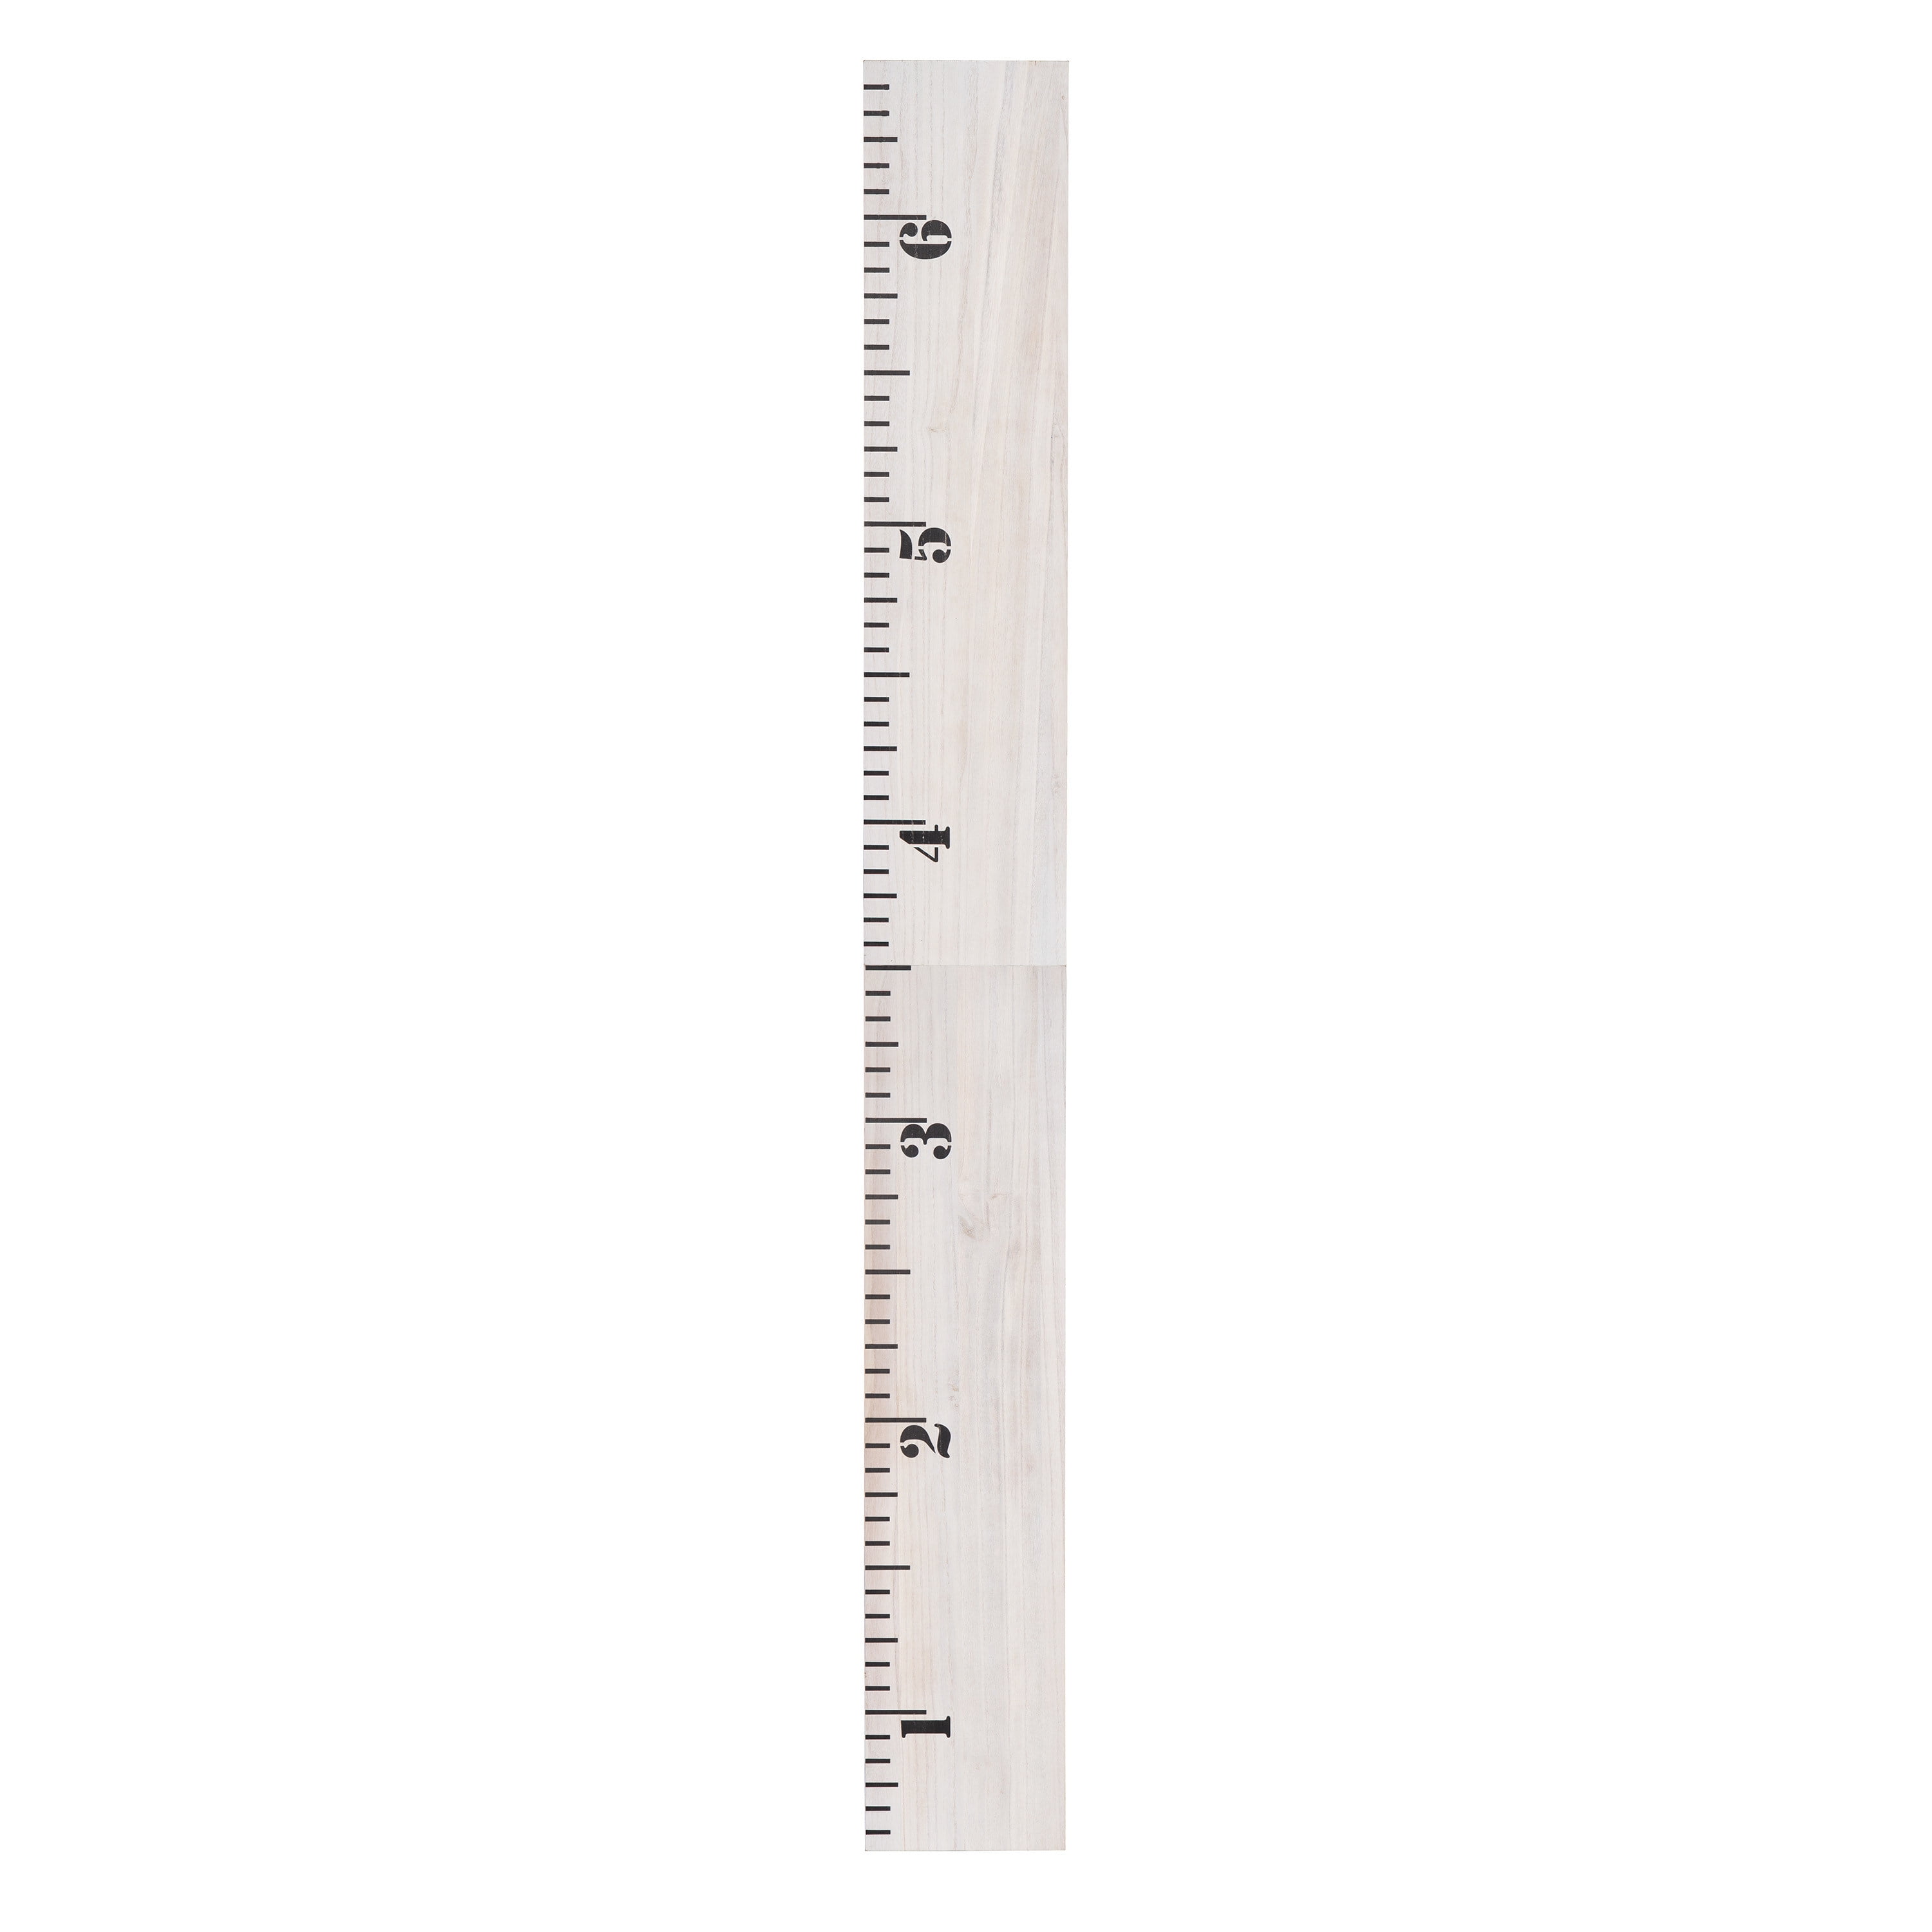 Matte White, 6.5in Wide x 6.5ft. Tall Vinyl Growth Chart Decal 6.5 Tall DIY Ruler Decal Kit Kids Height Ruler Measuring Tape Sticker 